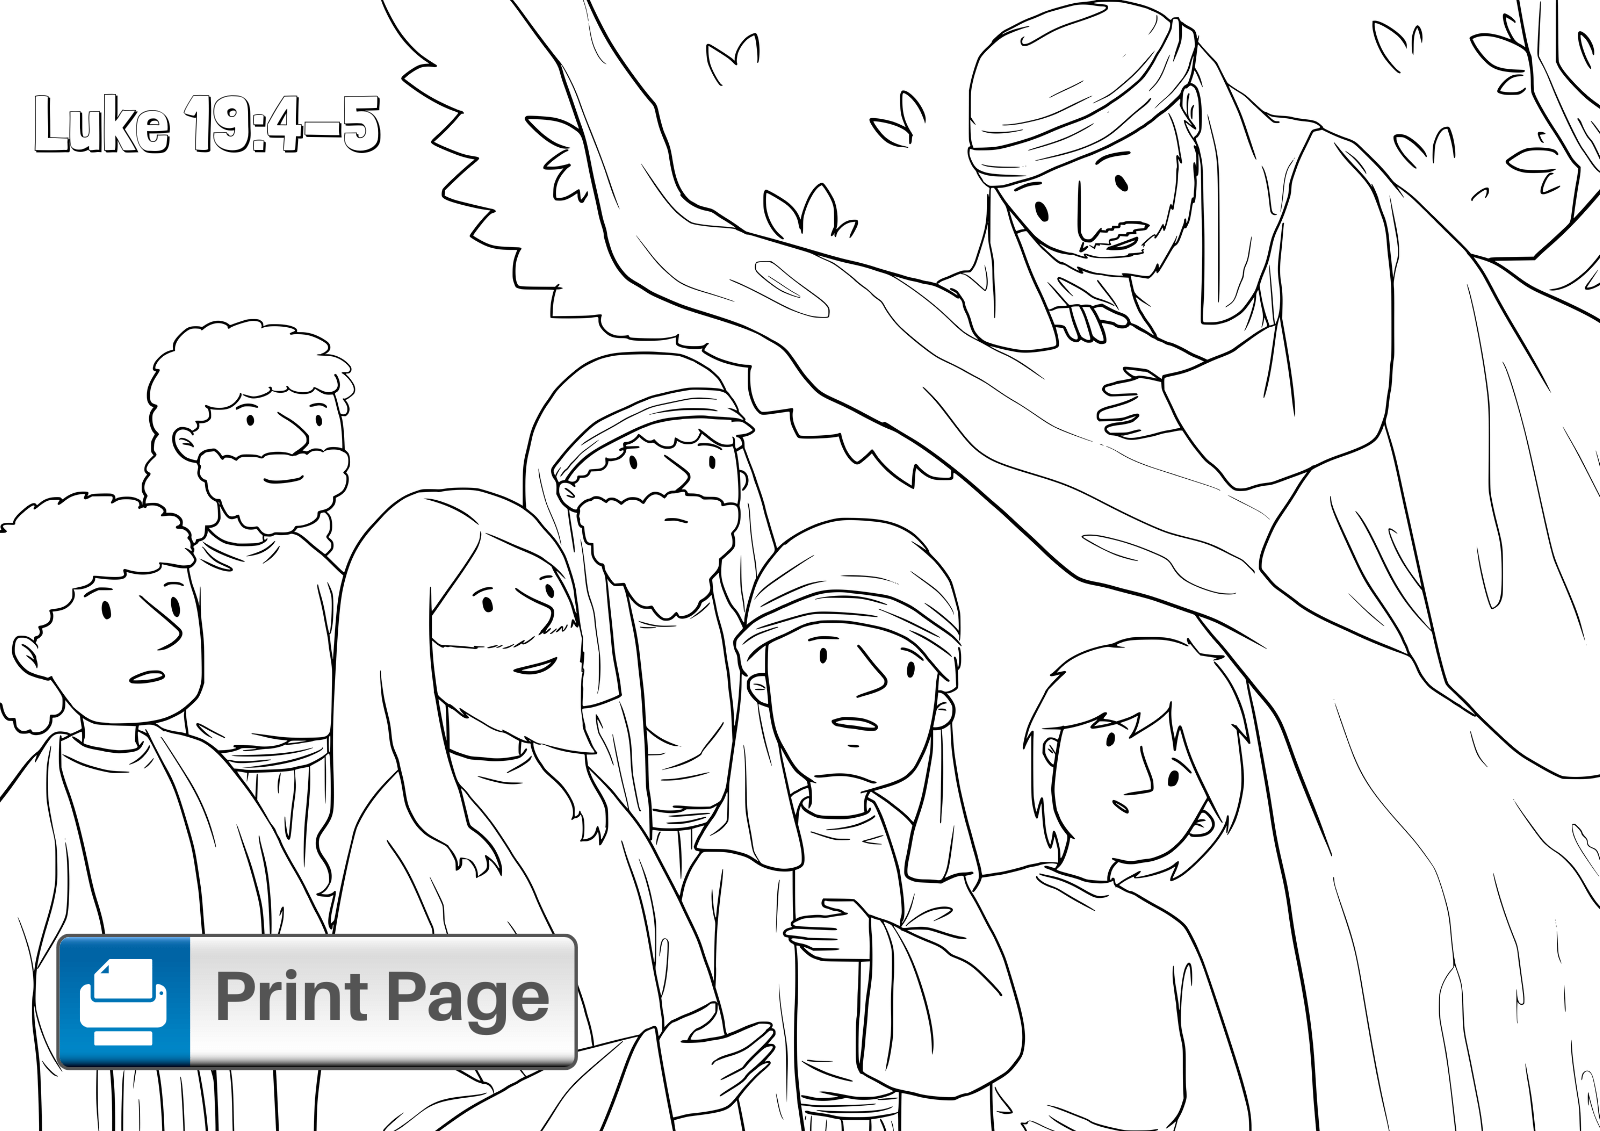 Free Printable Zacchaeus Coloring Pages for Kids ConnectUS